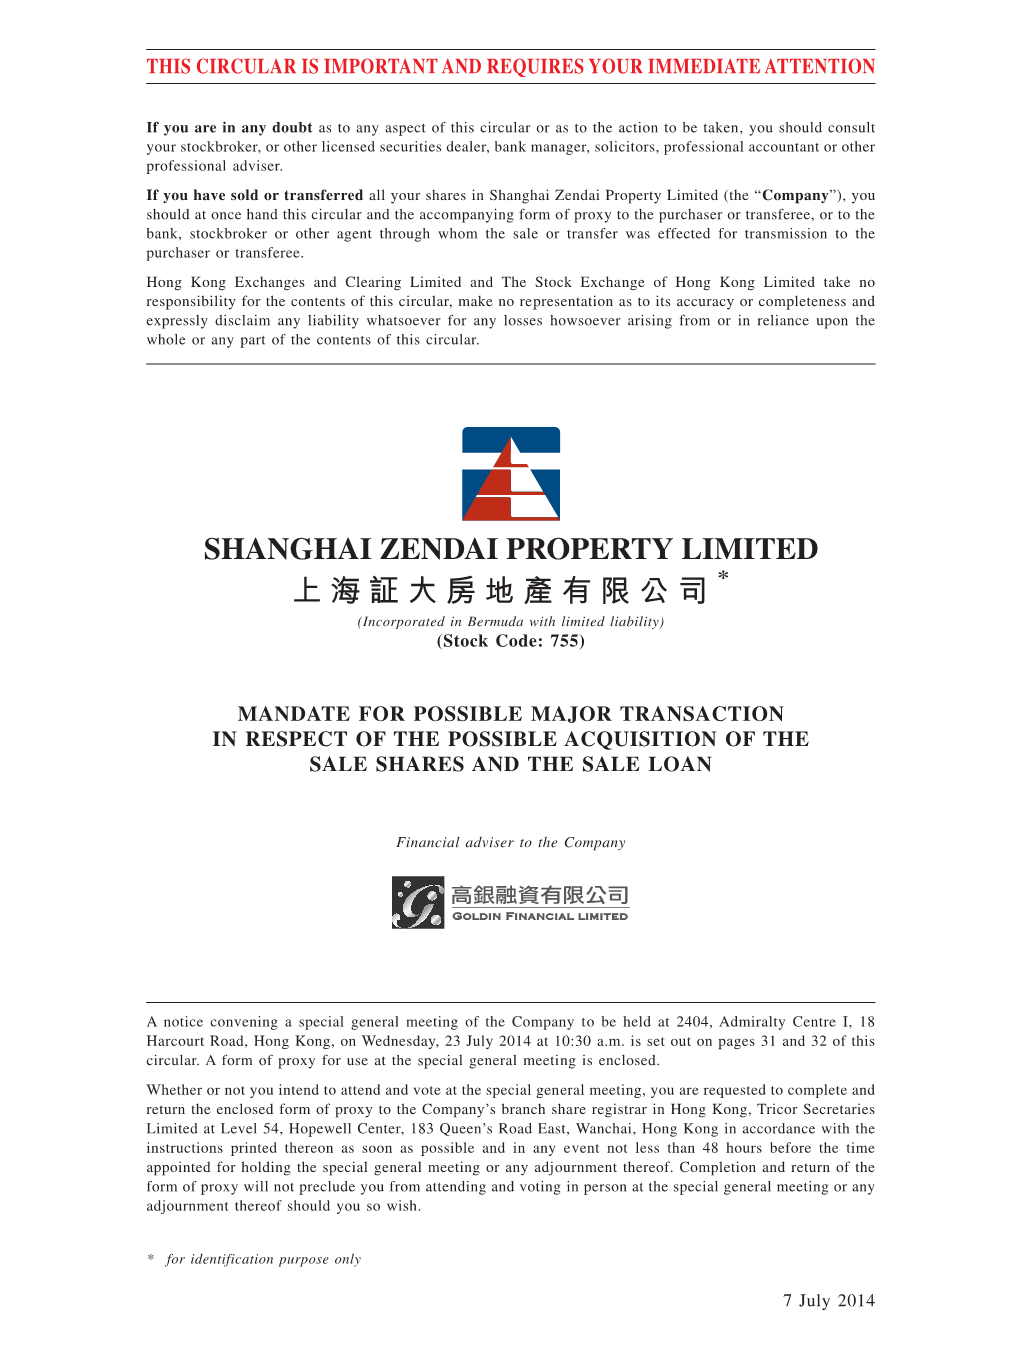 SHANGHAI ZENDAI PROPERTY LIMITED 上海証大房地產有限公司 * (Incorporated in Bermuda with Limited Liability) (Stock Code: 755)